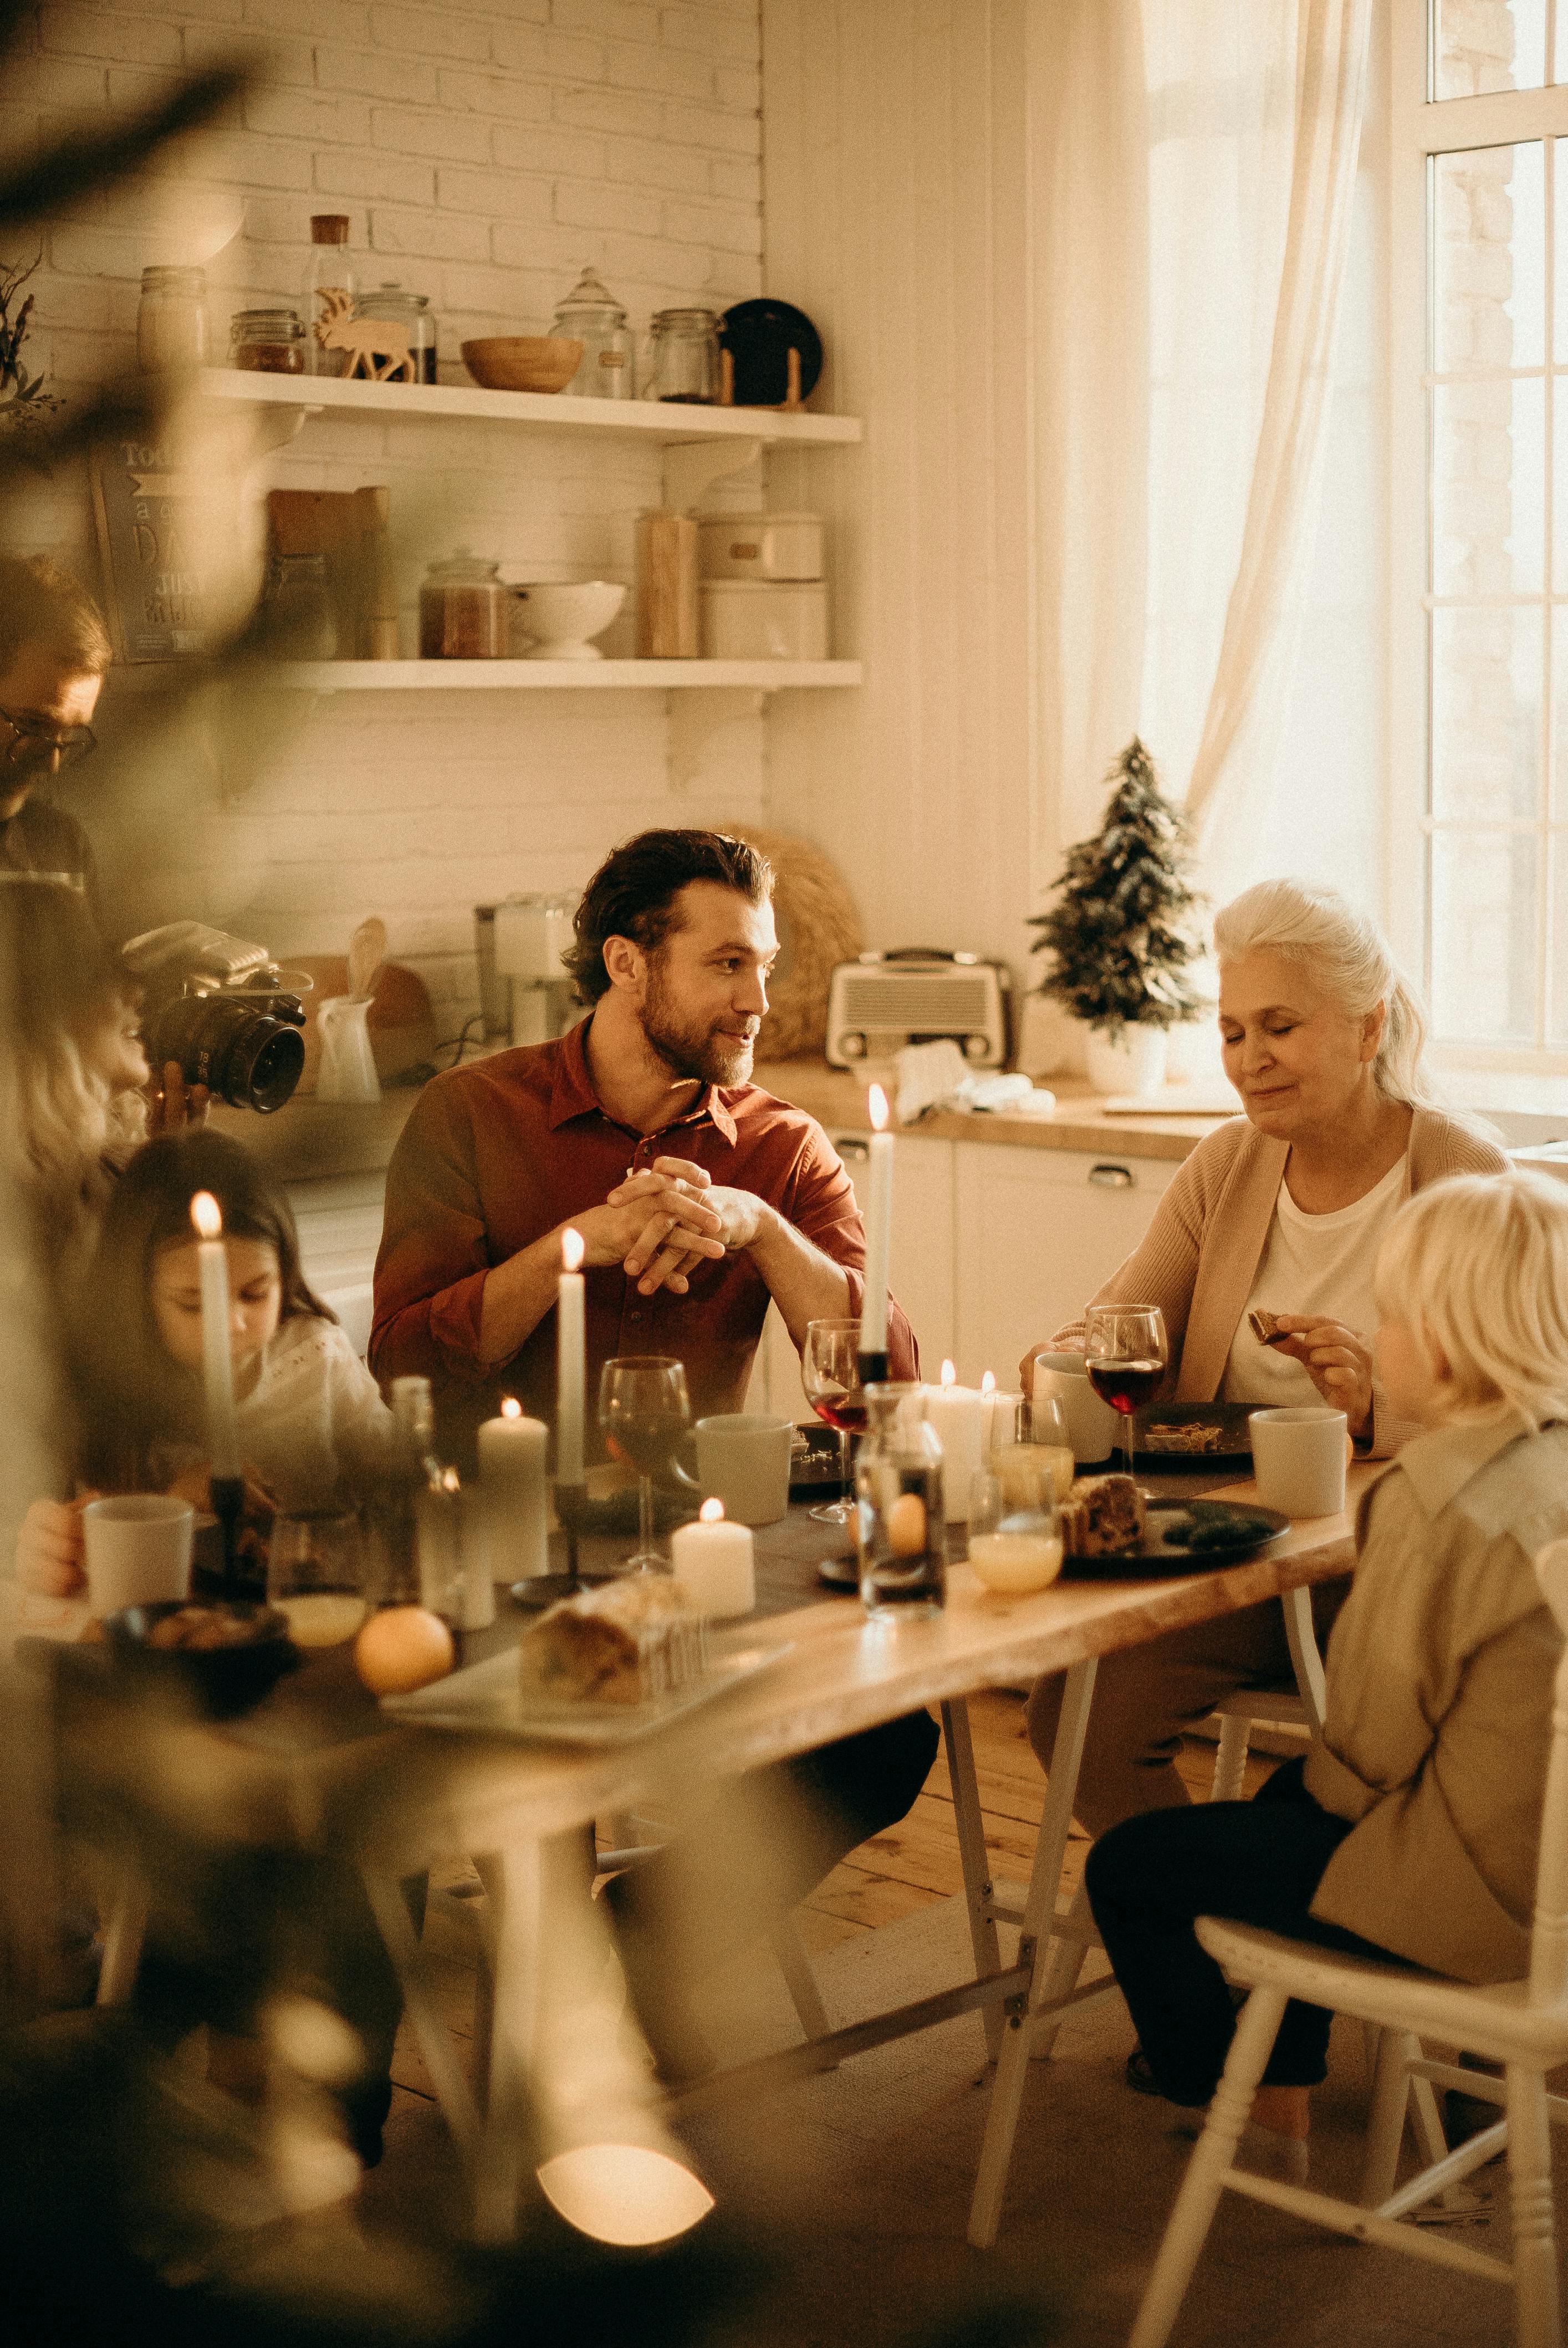 A family gathered together for a meal | Source: Pexels